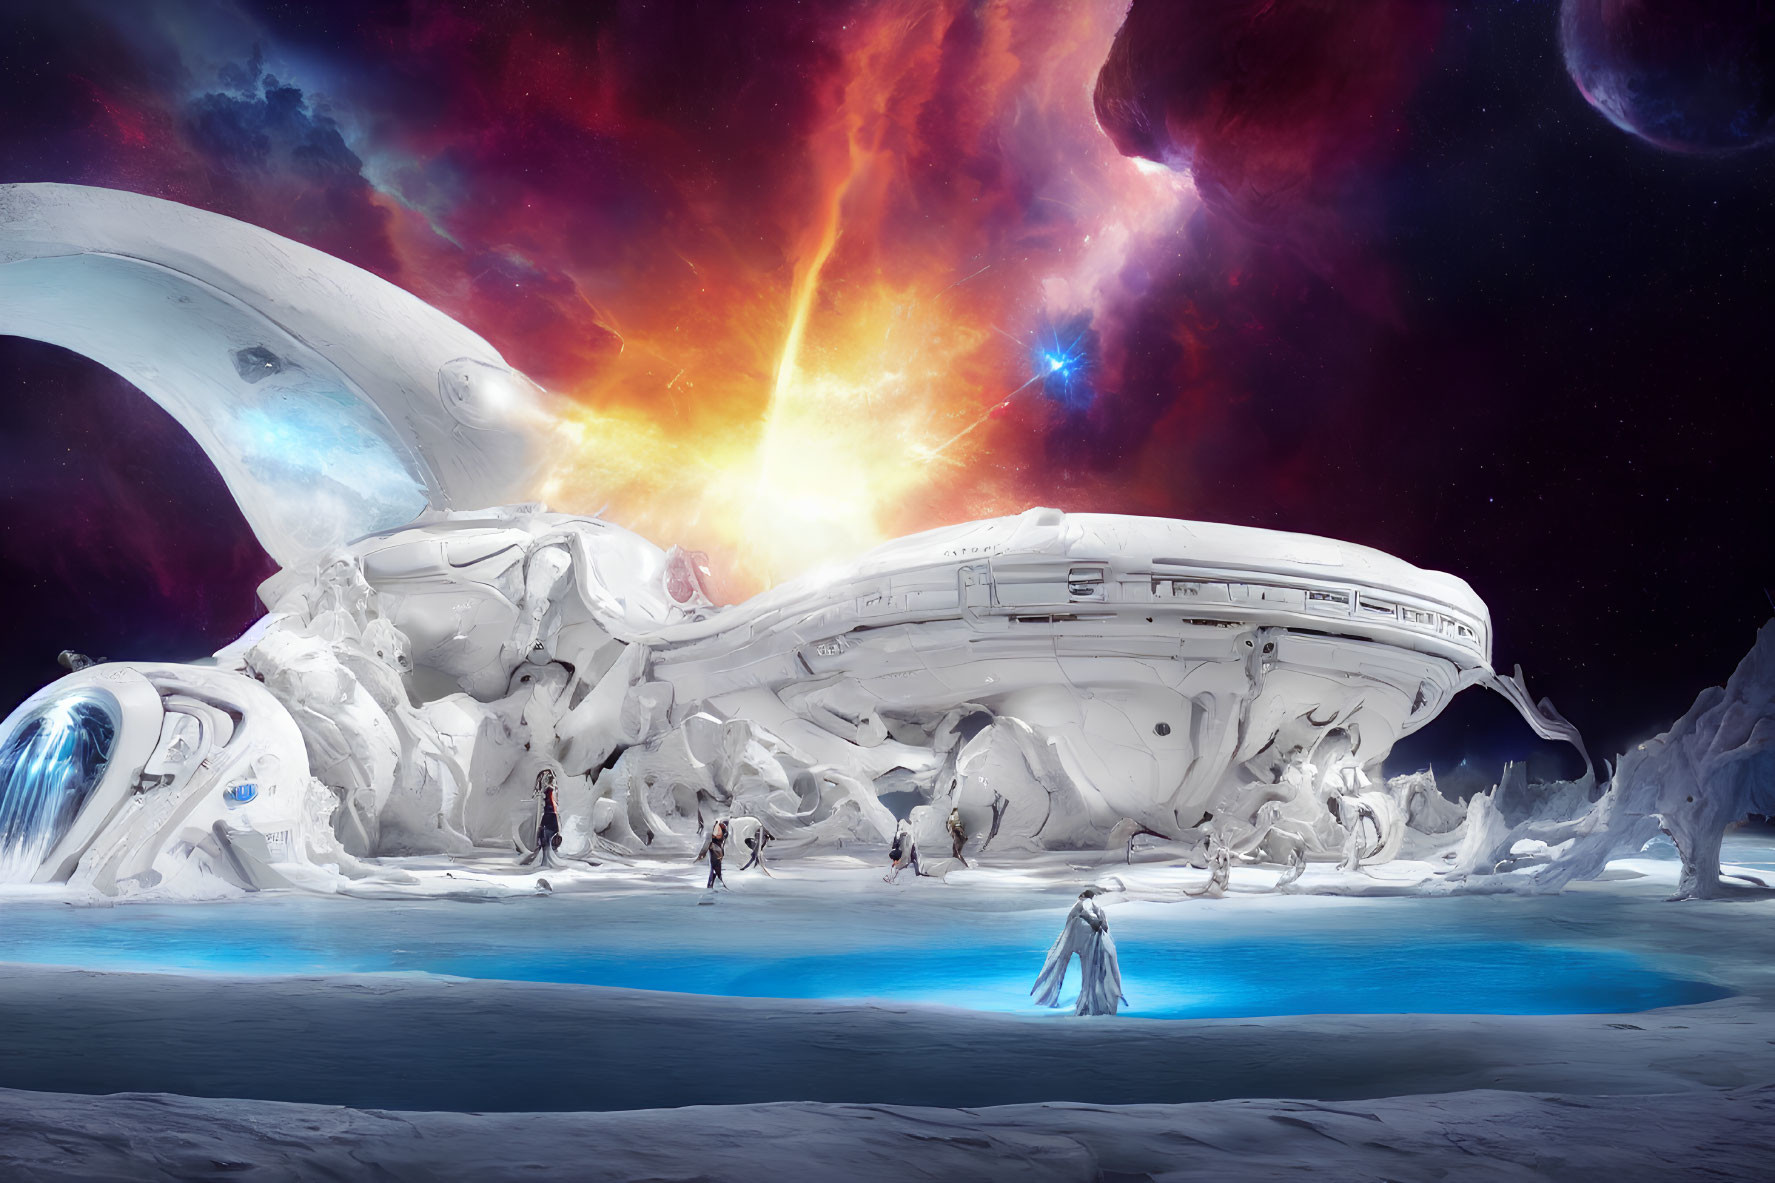 Futuristic organic spaceship on icy alien landscape with human figures